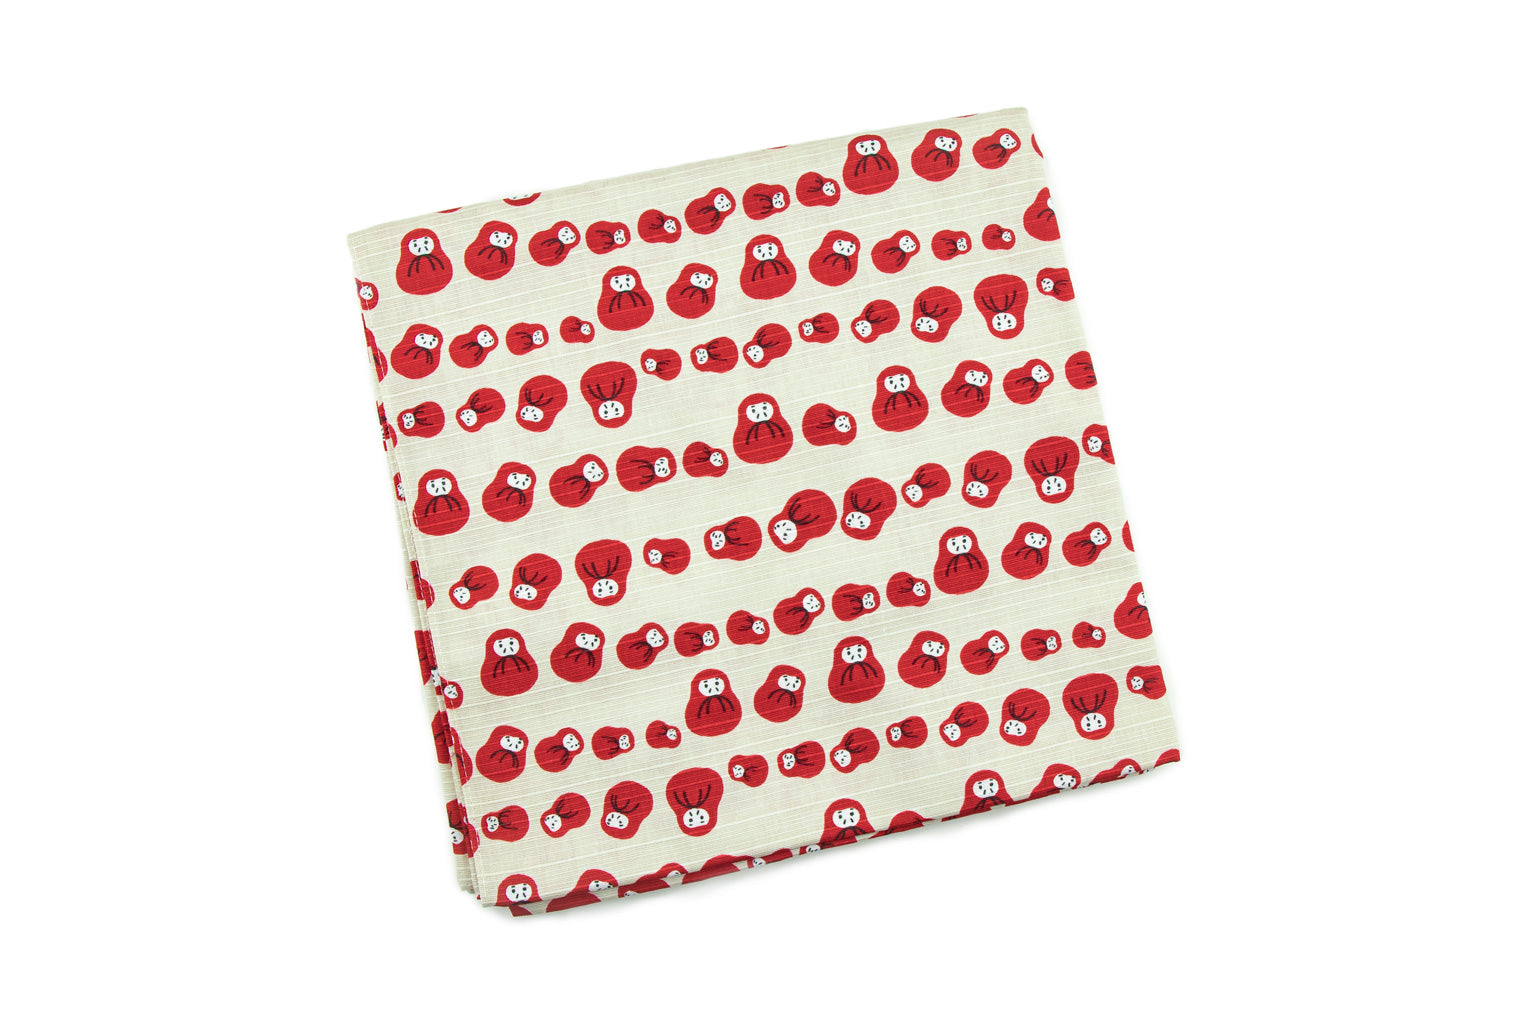 Angela Lansbury Wrapping Paper By Angie Beal Designs   notonthehighstreetcom